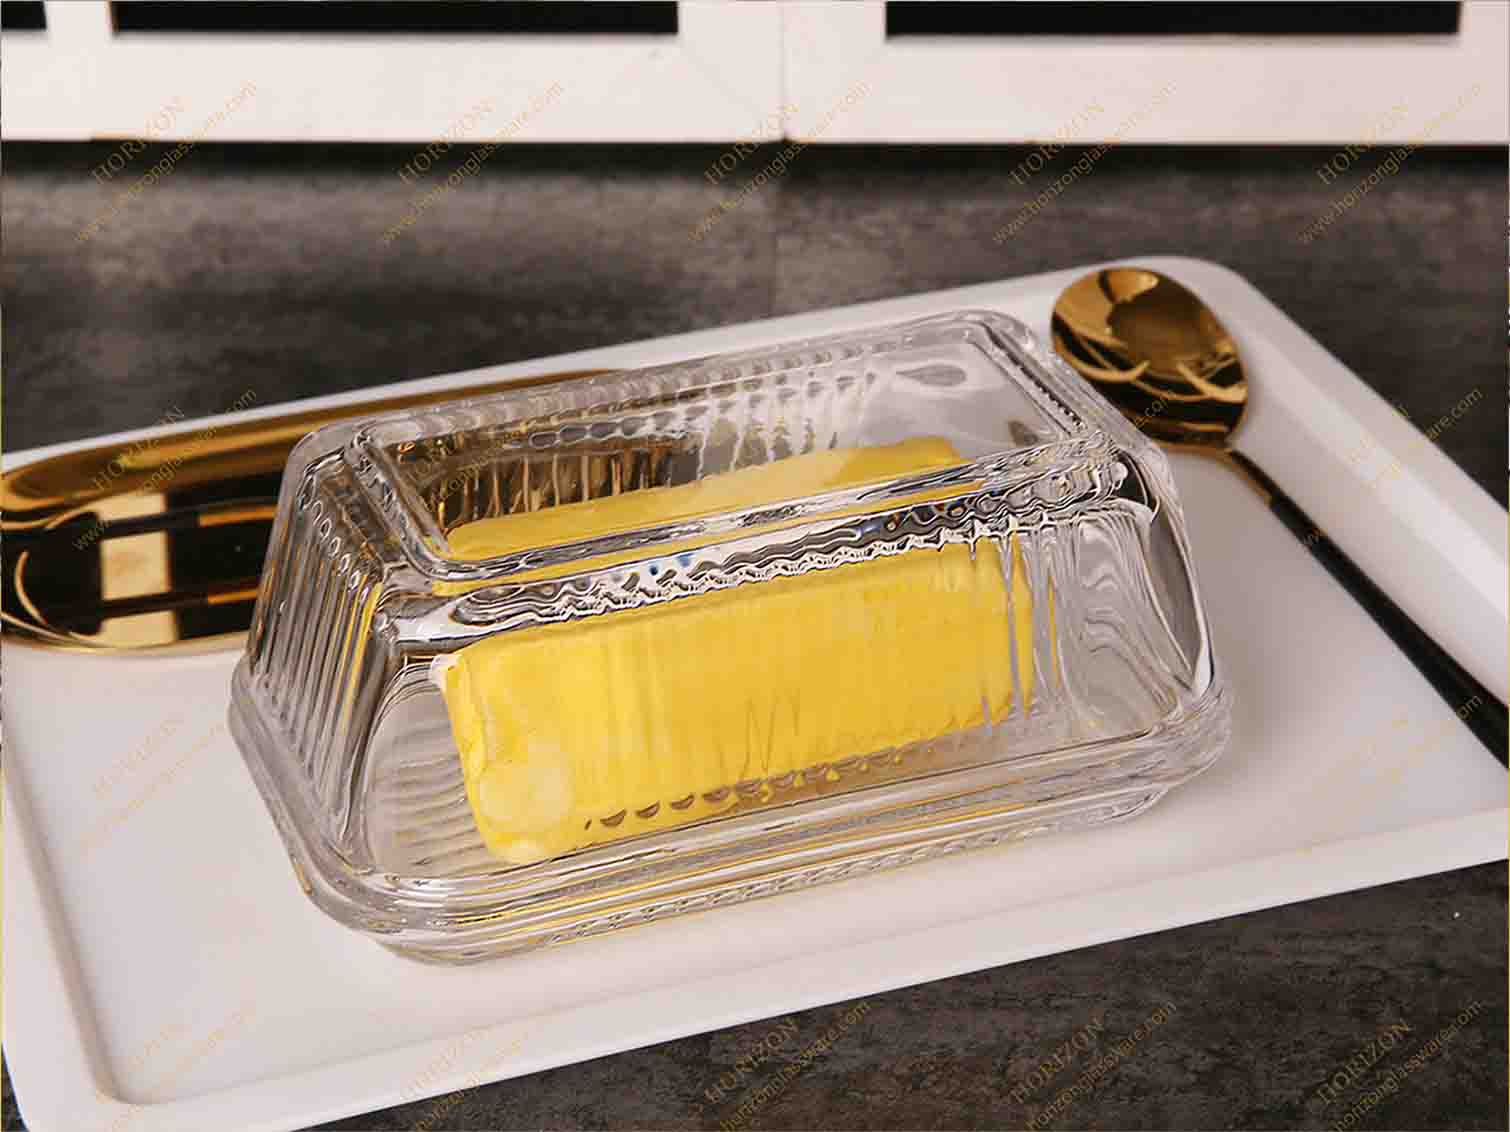 Butter dish  HY2020-0475